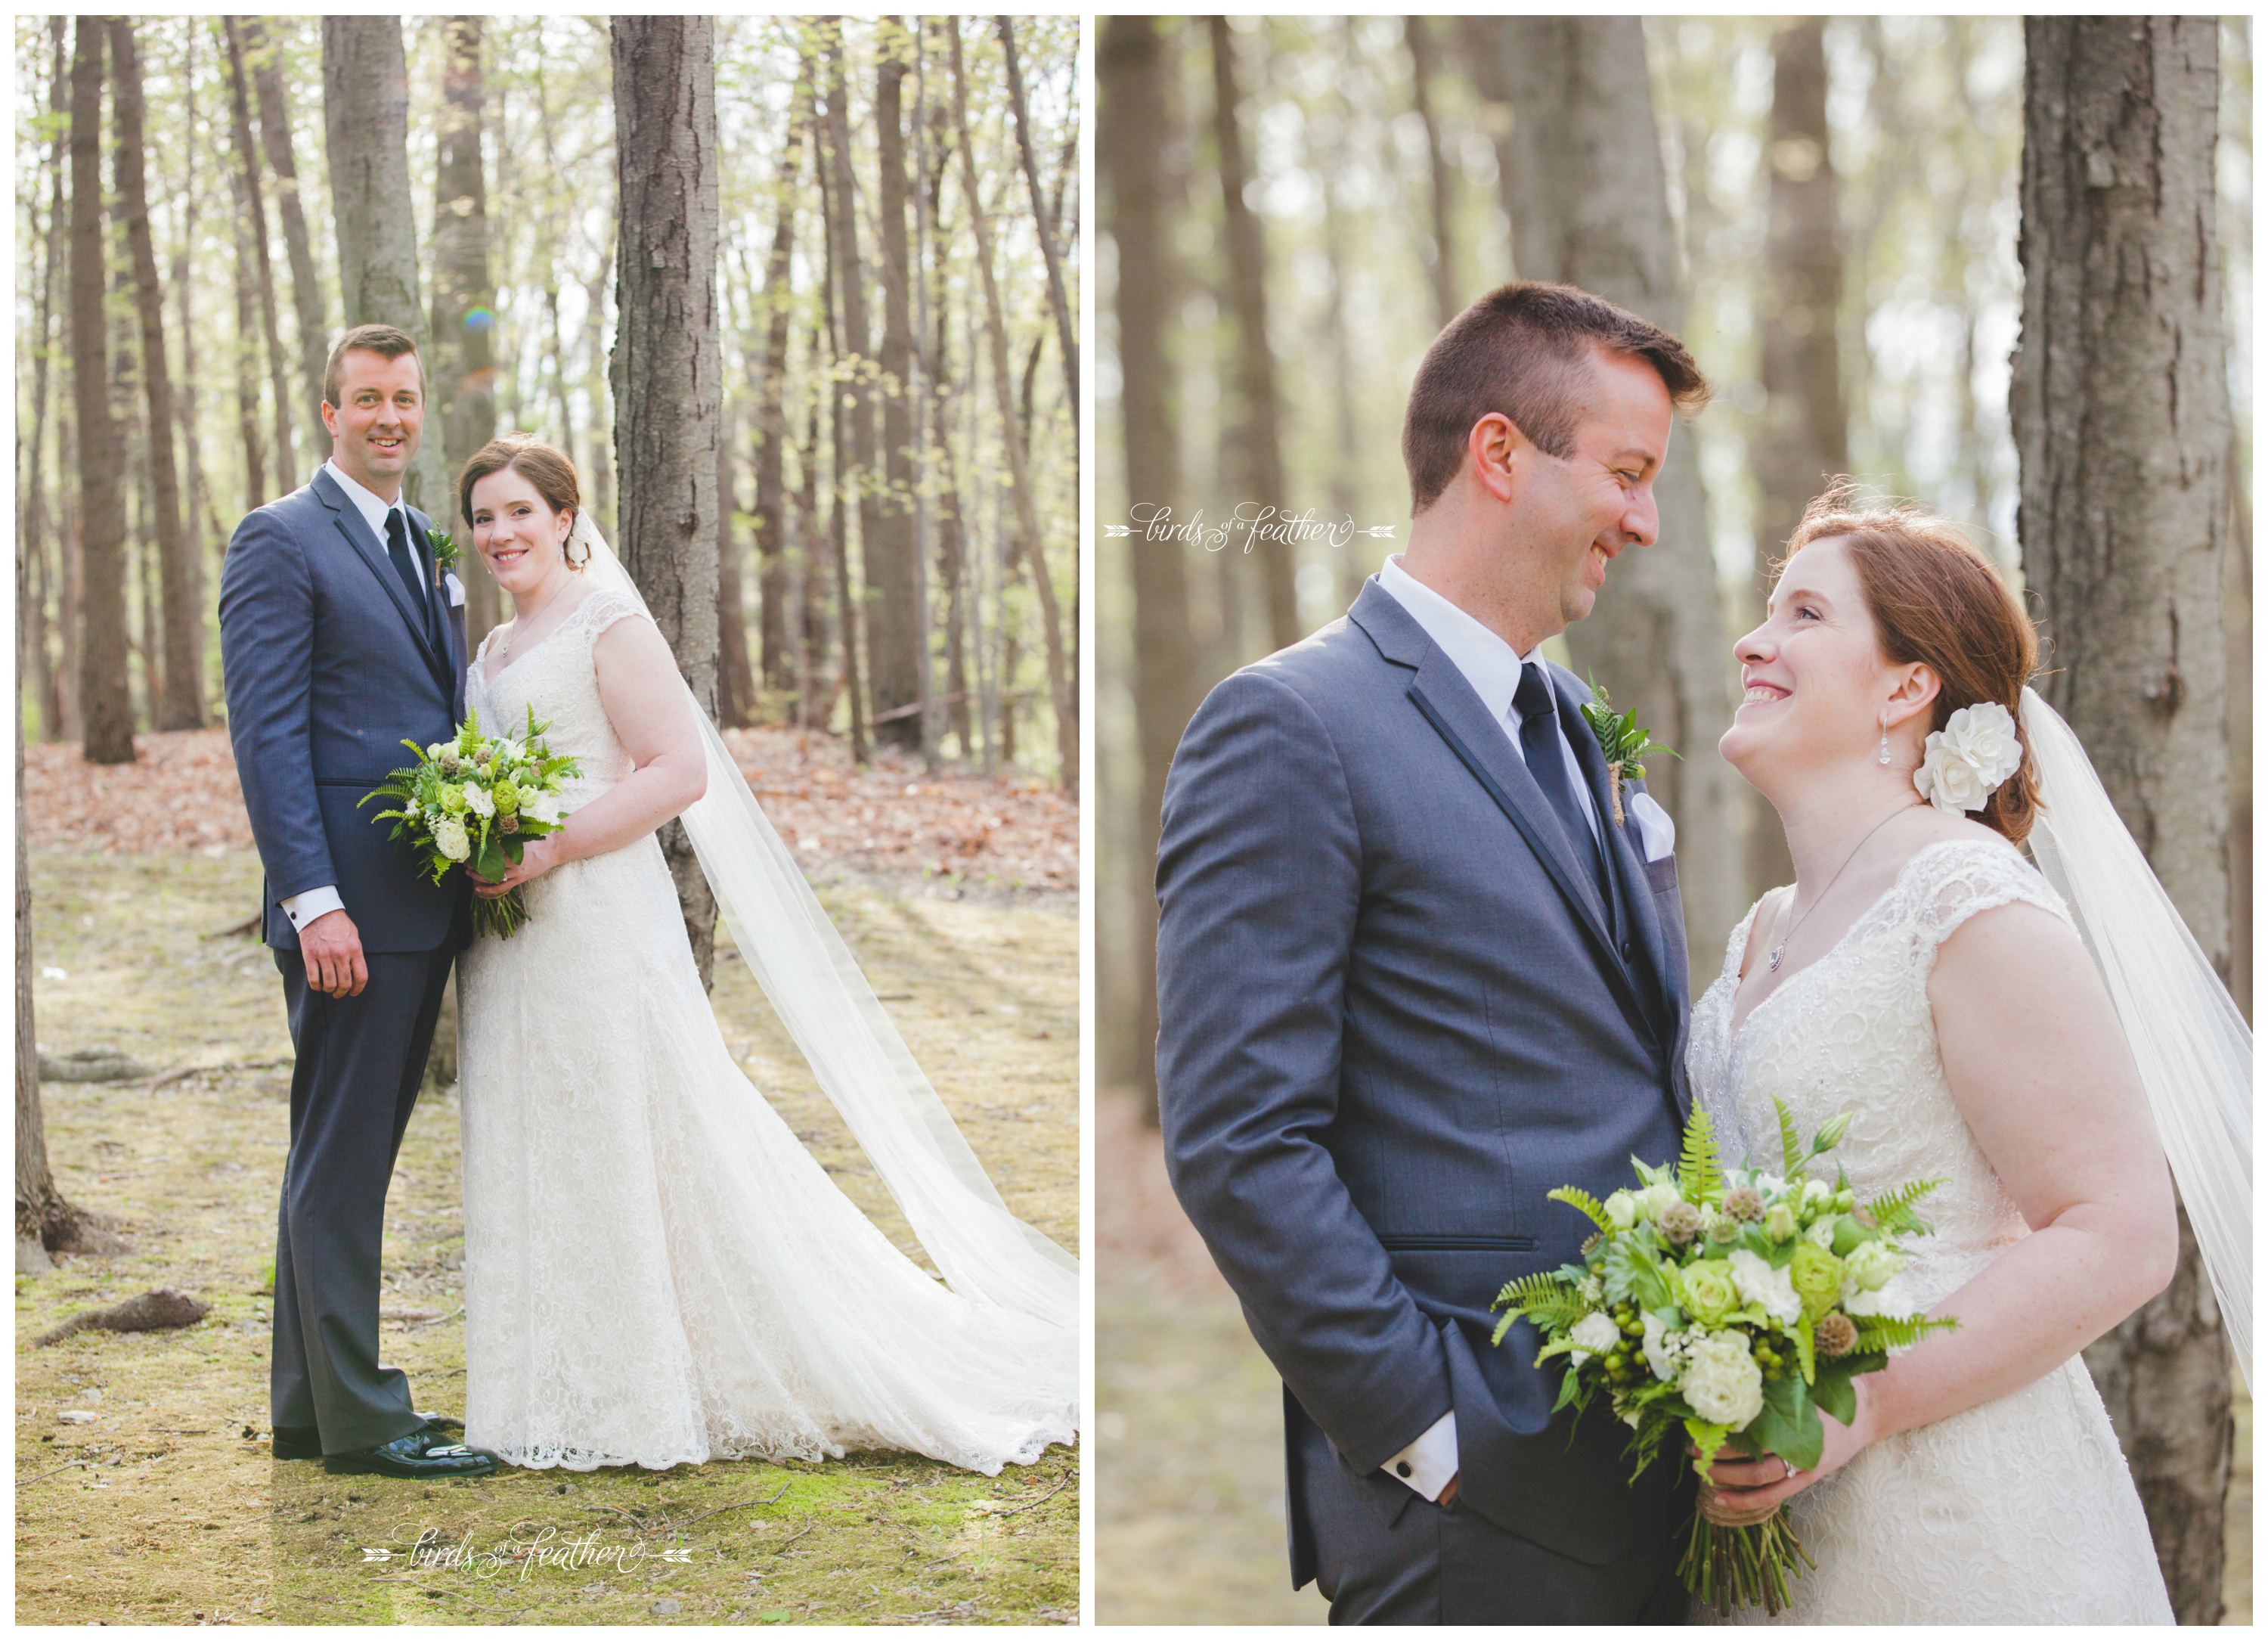 Laura & Jeff | Stroudsmoor Country Inn Wedding, Stroudsburg PA | Birds of a Feather Photography